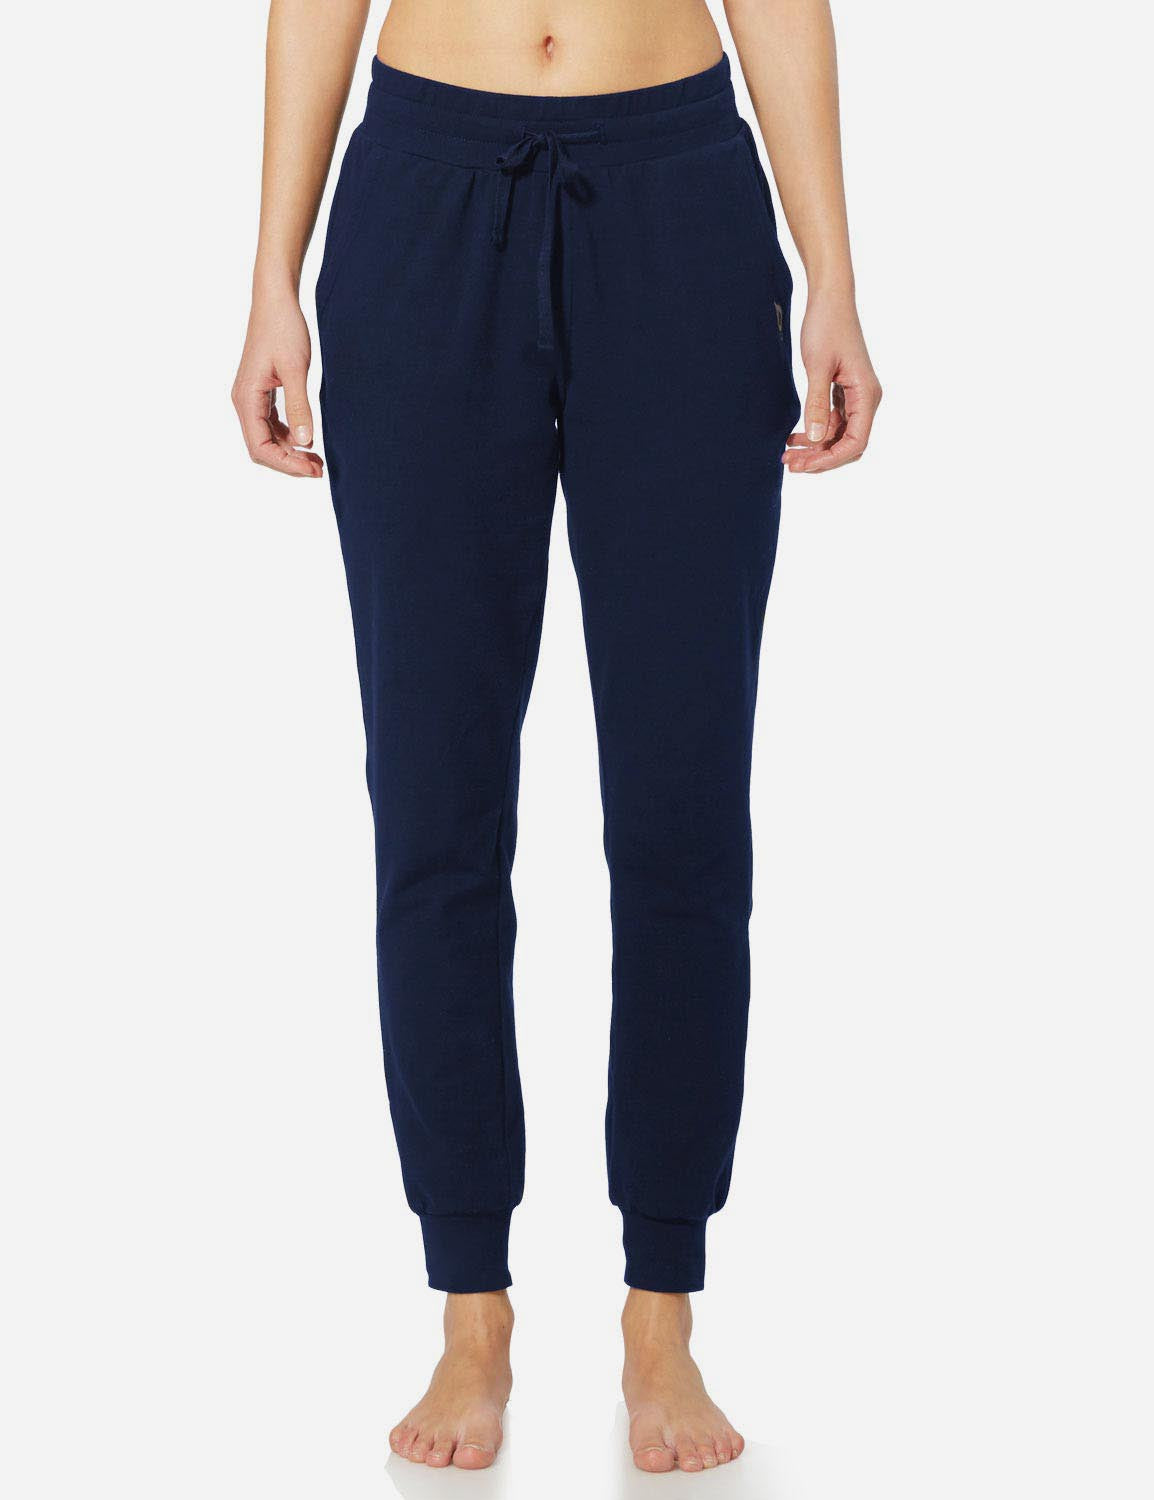 Baleaf Women's Cotton Comfy Pocketed & Tapered Weekend Joggers abh103 Navy Blue Front